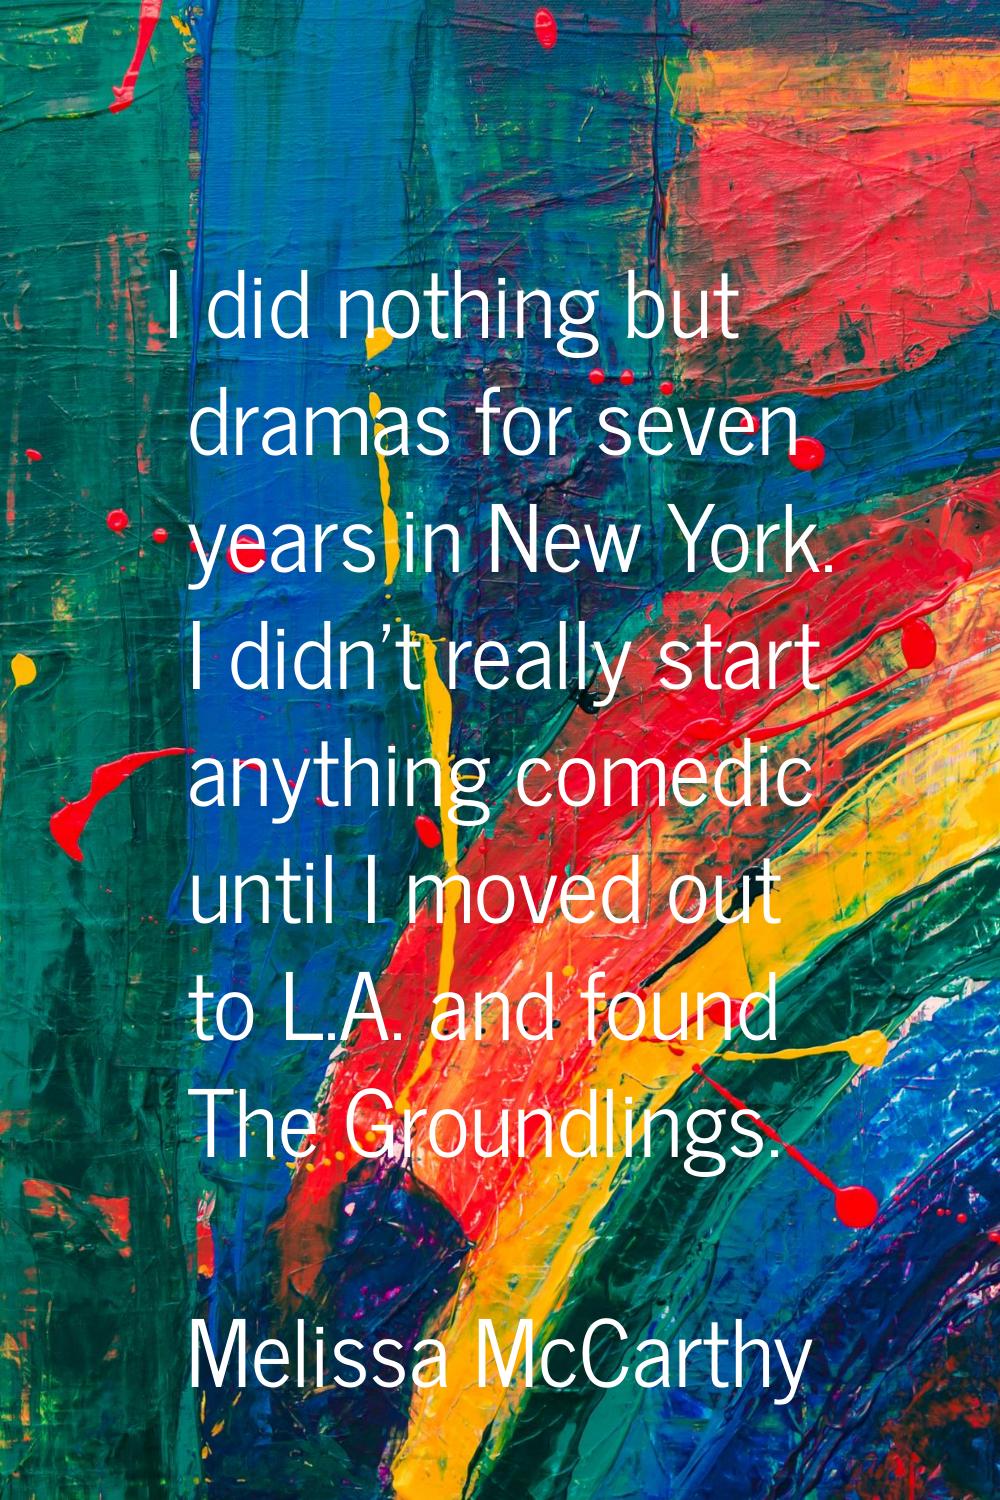 I did nothing but dramas for seven years in New York. I didn't really start anything comedic until 